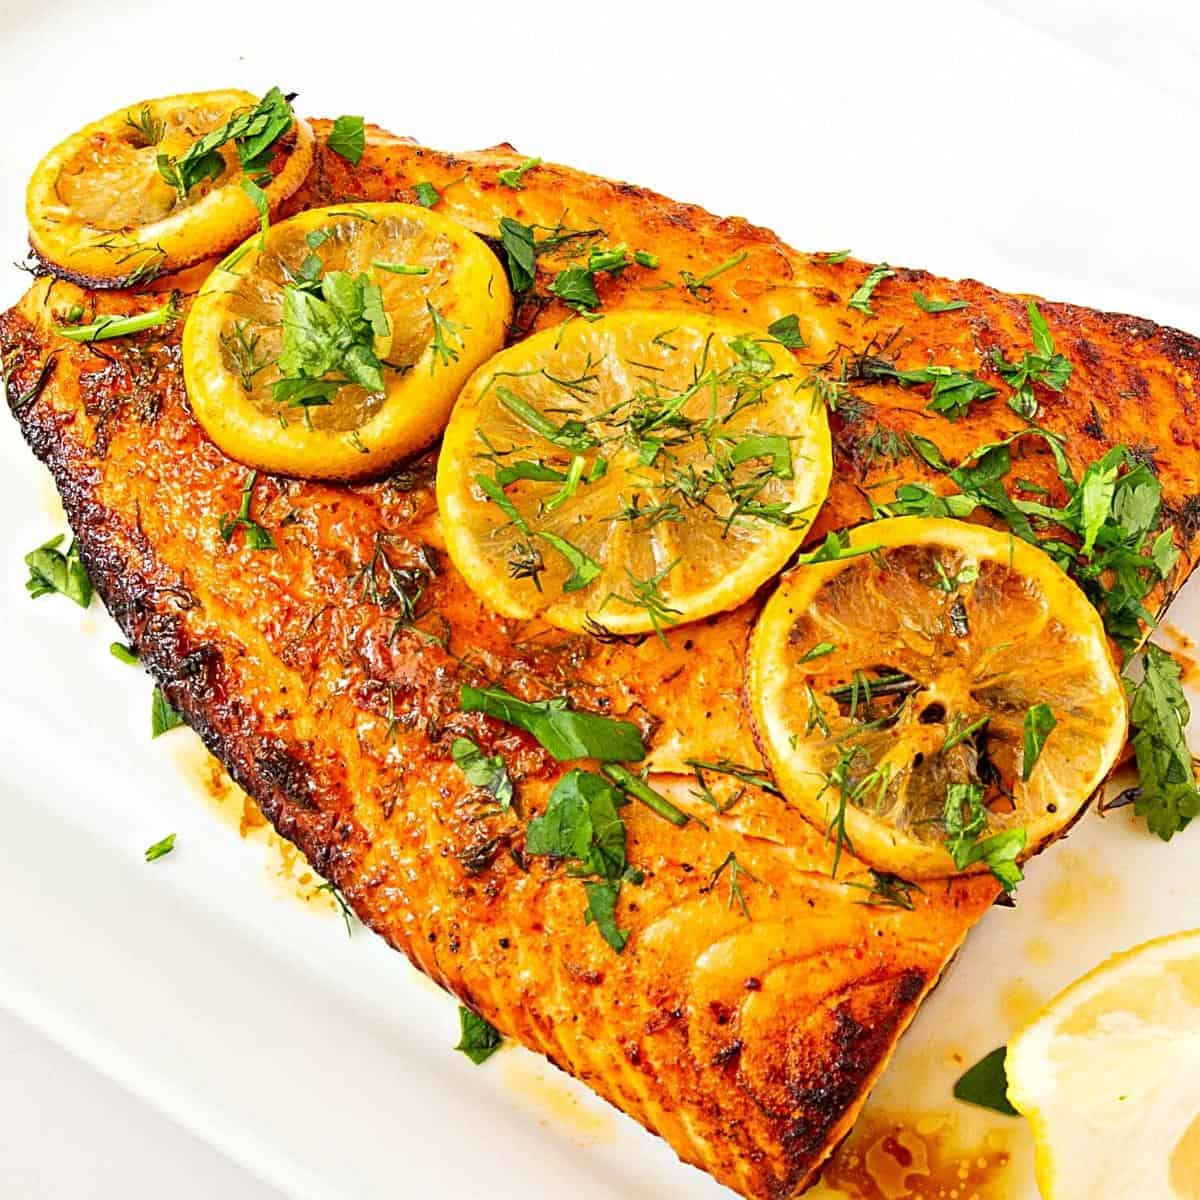 Baked salmon topped with lemon slices.